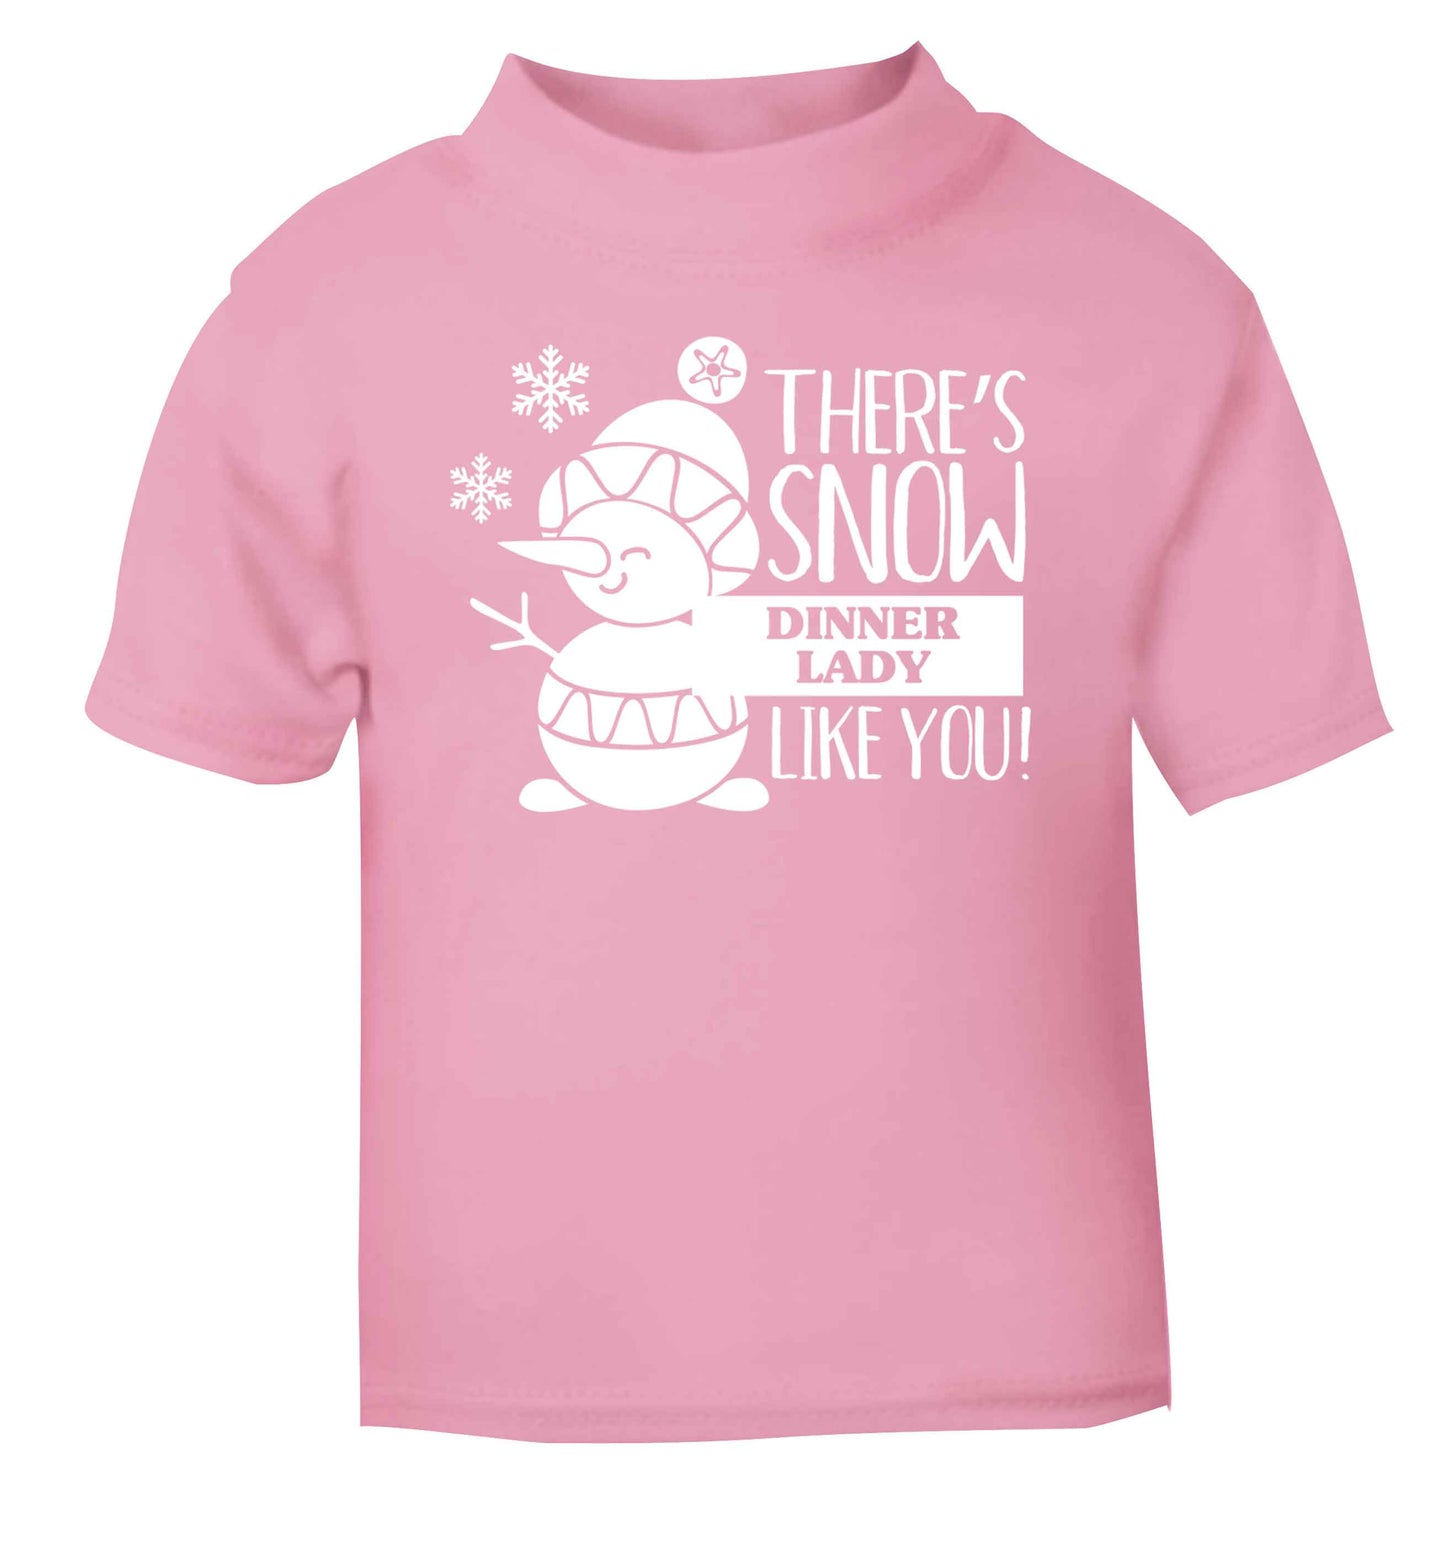 There's snow dinner lady like you light pink baby toddler Tshirt 2 Years